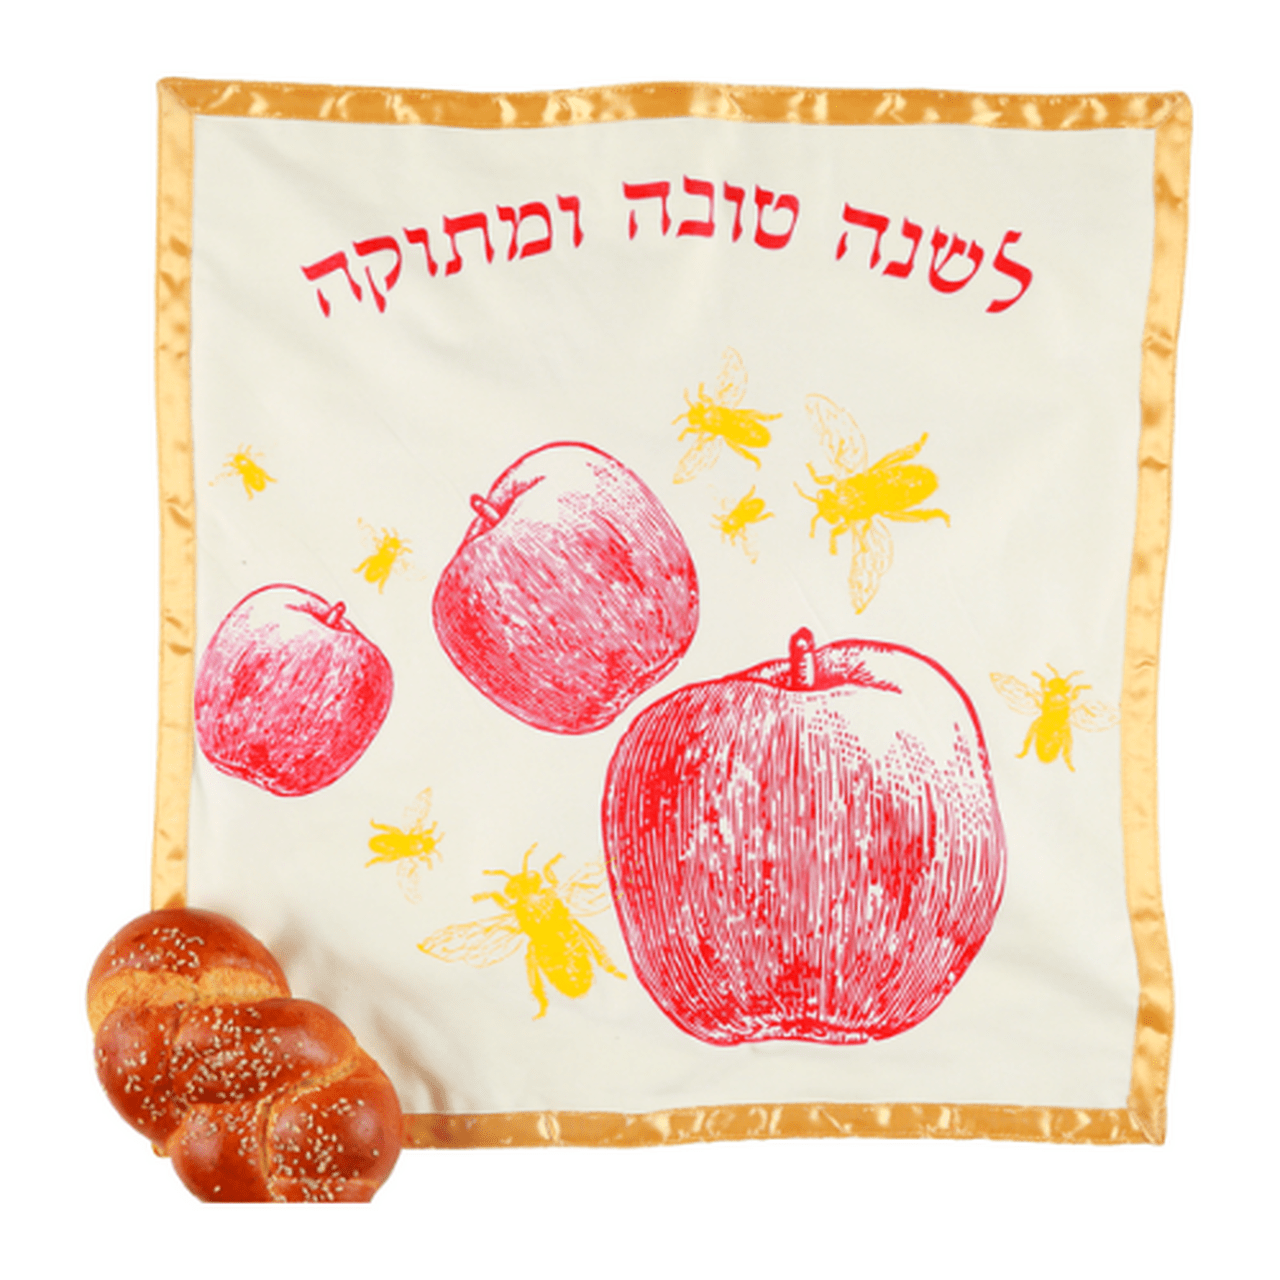 Barbara Shaw Challah Accessories Apples and Bees Challah Cover